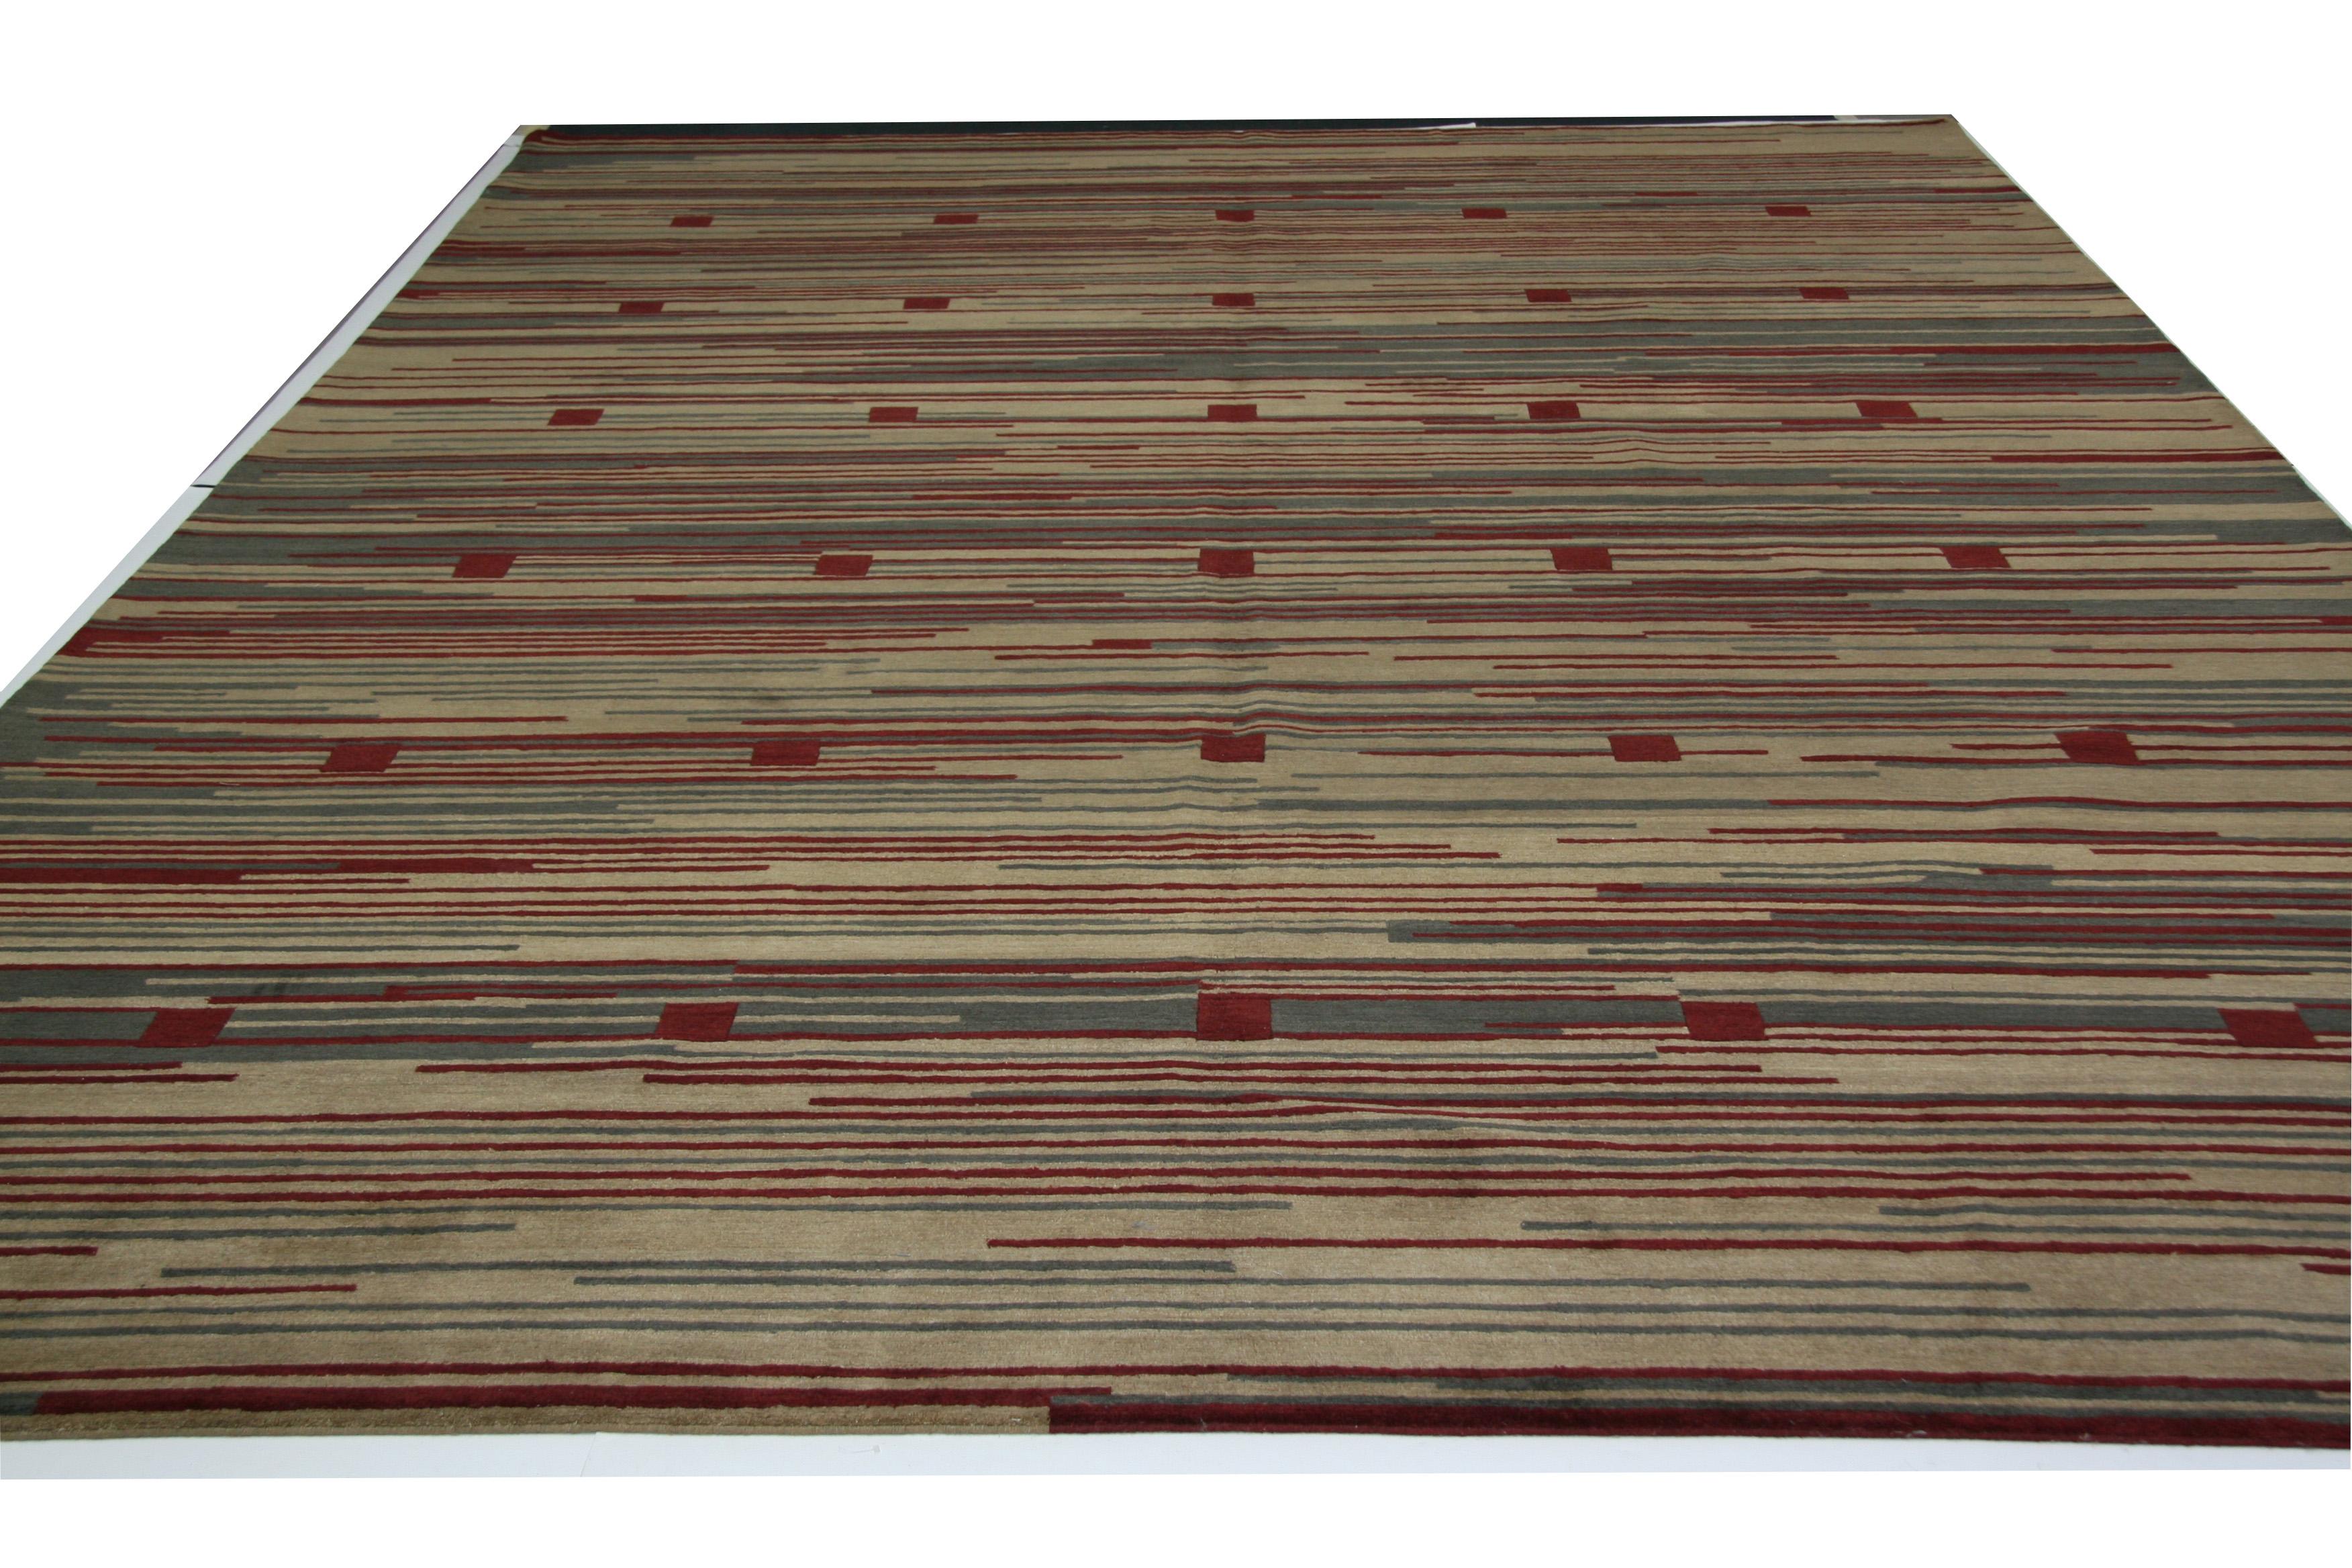 Red squares set against a background of beige, red and grey stripes makes for just the right amount of bold in a rug that can attract attention without detracting from other aspects of the space. Hand knotted in Nepal using wool dyed with natural